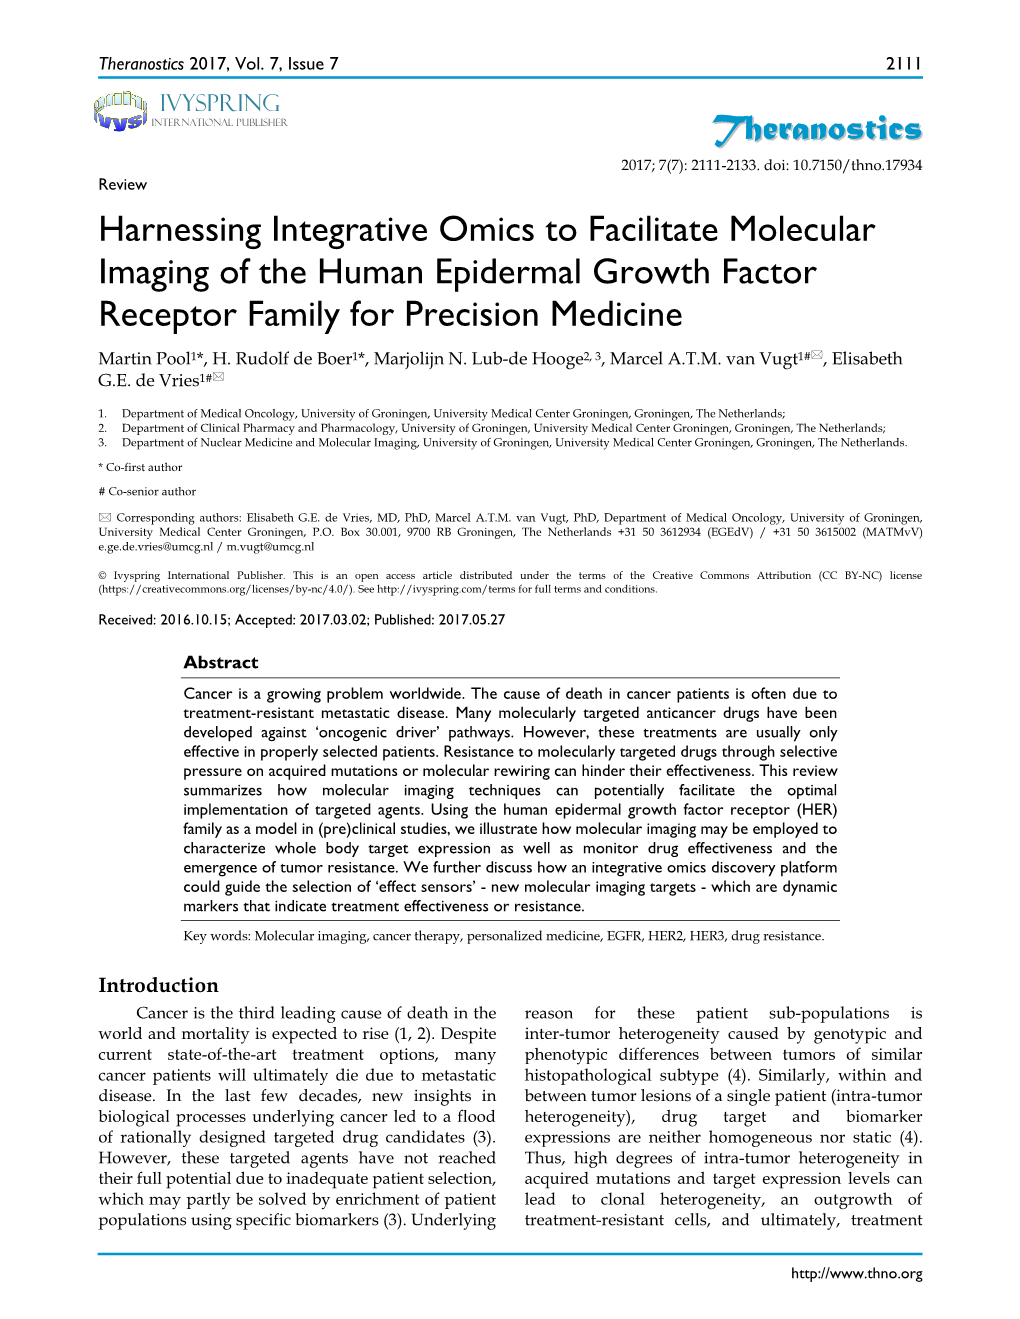 Harnessing Integrative Omics to Facilitate Molecular Imaging of the Human Epidermal Growth Factor Receptor Family for Precision Medicine Martin Pool1*, H